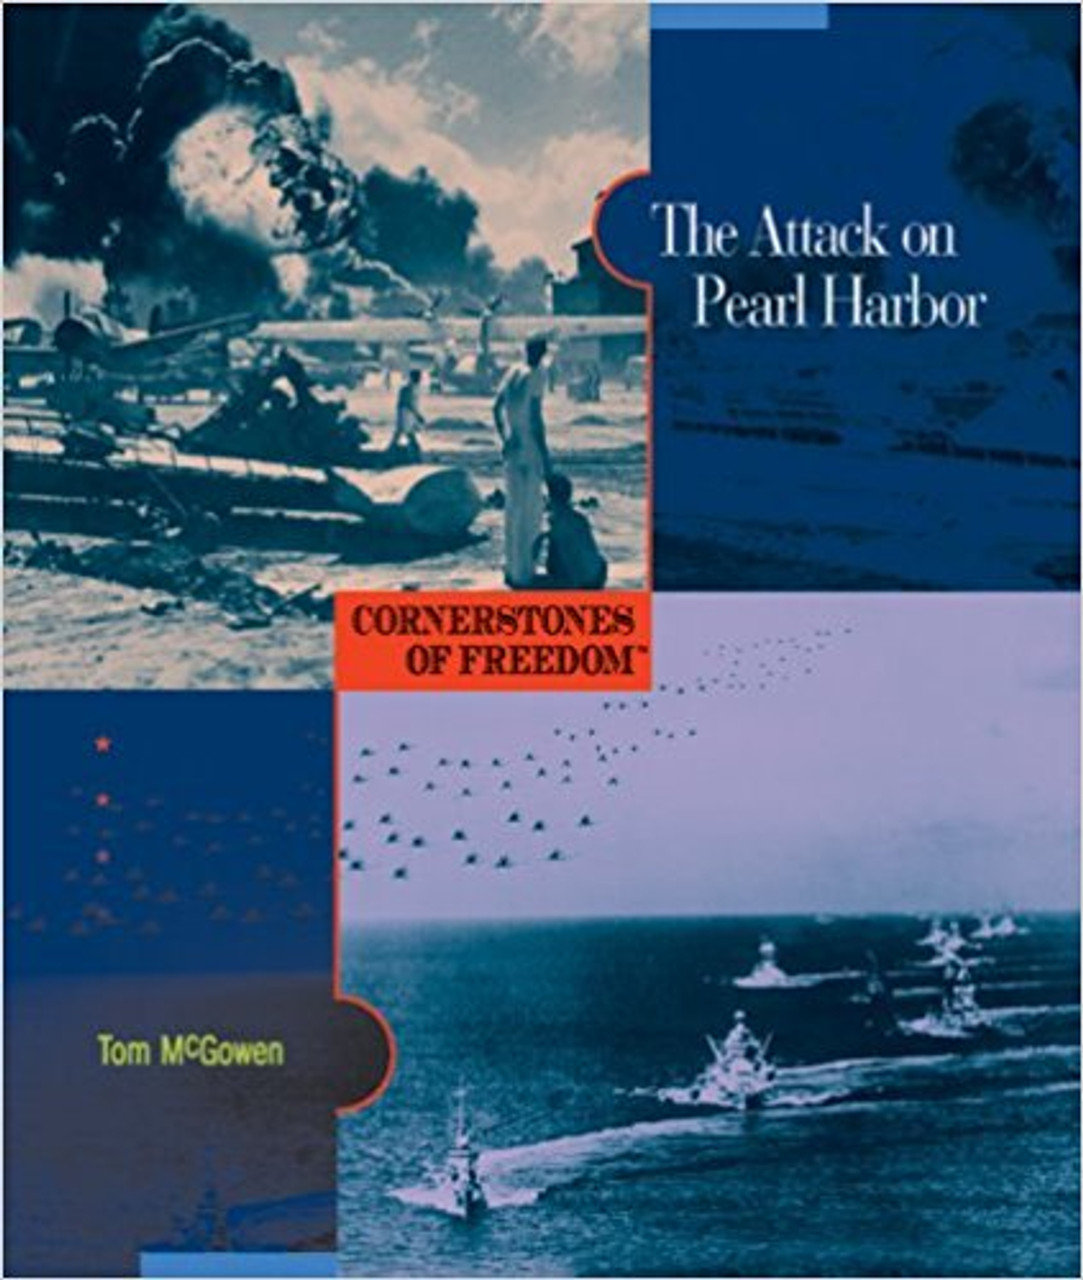 On December 7, 1941, six Japanese aircraft carriers launched a surprise attack on the Pearl Harbor U.S. naval base in Oahu, Hawaii. More than 2,300 U.S. troops were killed in the attack, and around 1,200 more were wounded. This book details Japans motivations and planning efforts, as well as the U.S. reaction and resulting entry into World War II. It also contains a detailed recounting of the attack itself.